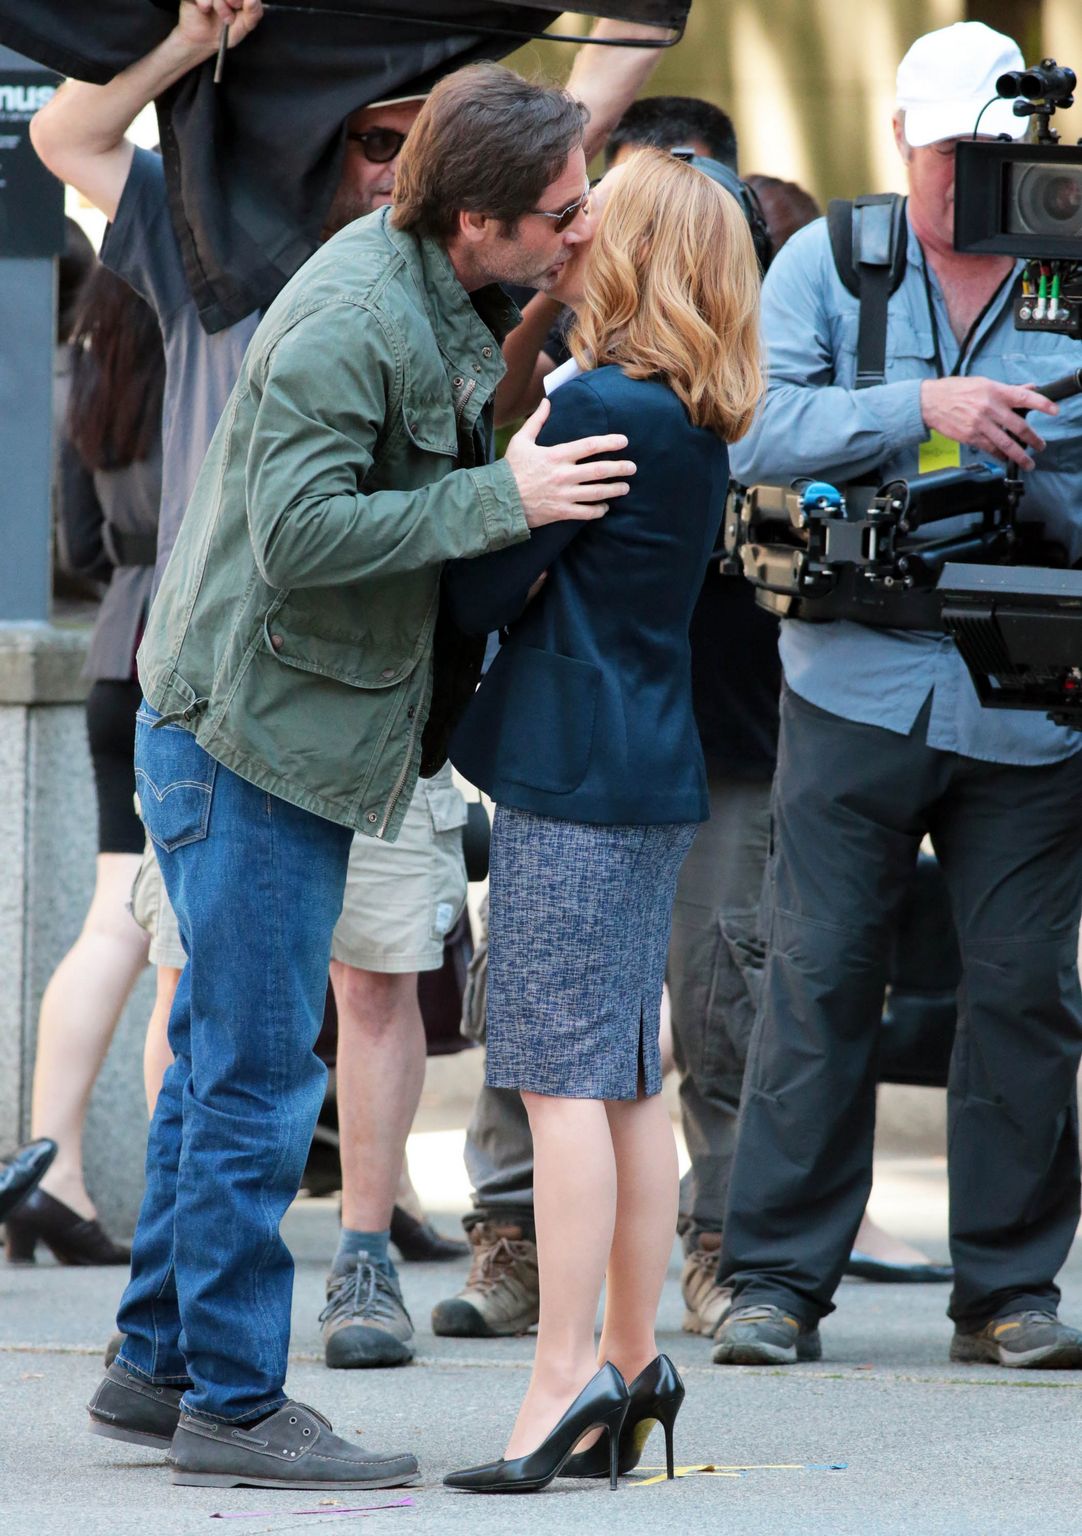 Gillian Anderson and David Duchovny Film The X-Files in Vancouver, Canada